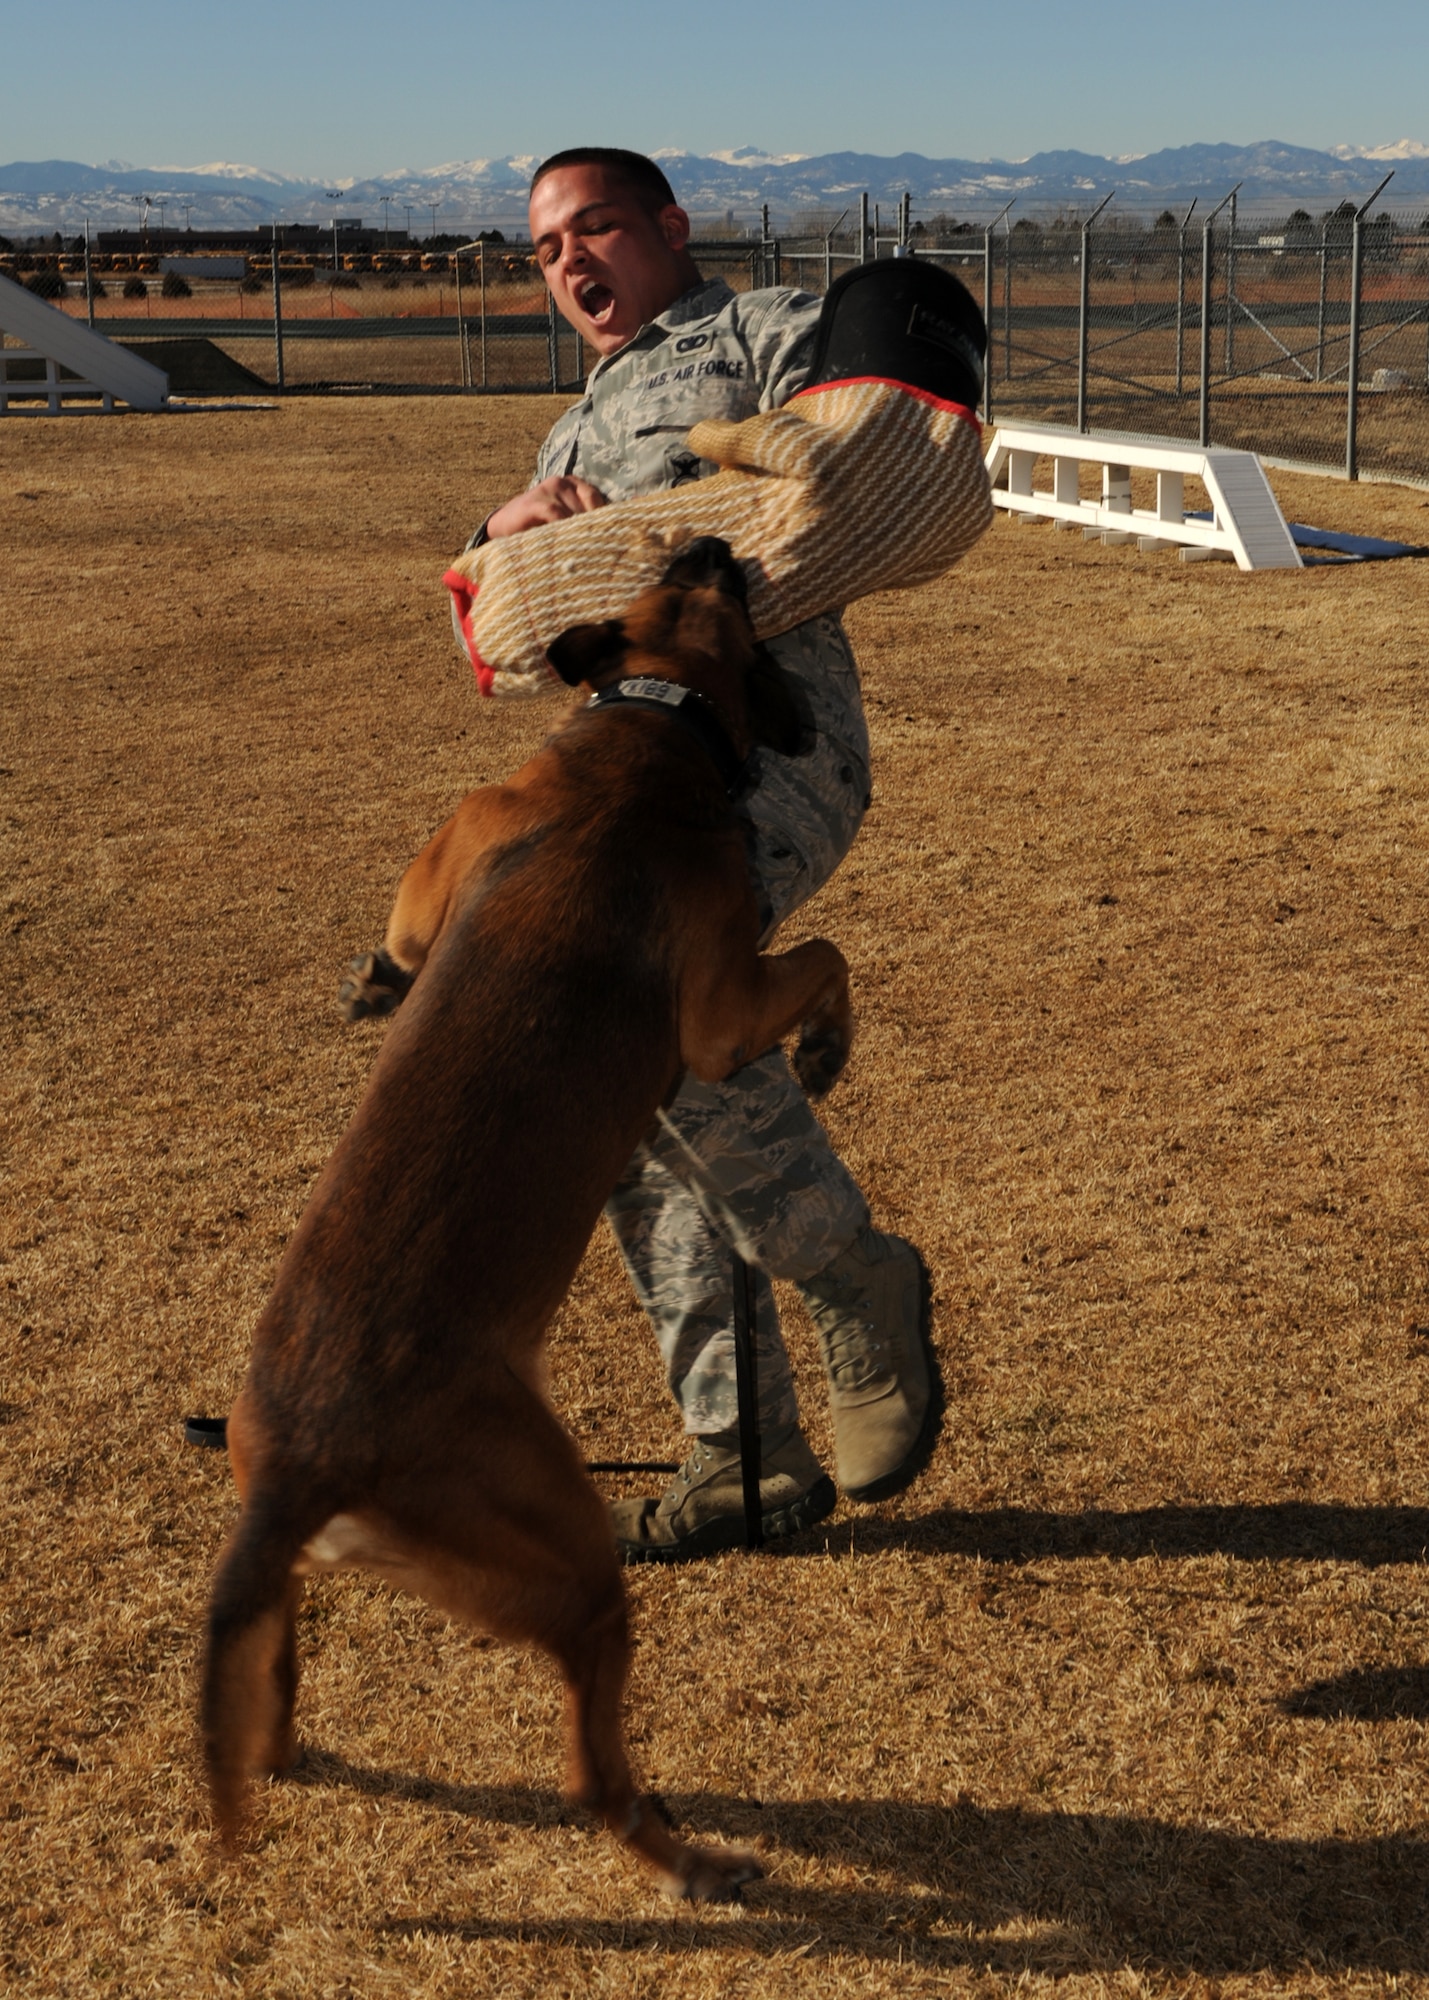 BUCKLEY AIR FORCE BASE, Colo. --Senior Airman Joshua Carabajal, 460th Security Forces military working dog handler, braces himself as Buddy attacks Jan 10, 2012. The K-9 unit at Buckley assists in check points, drug and bomb detection, exercise and emergency situations. (U.S. Air Force photo by Senior Airman Marcy Glass)
